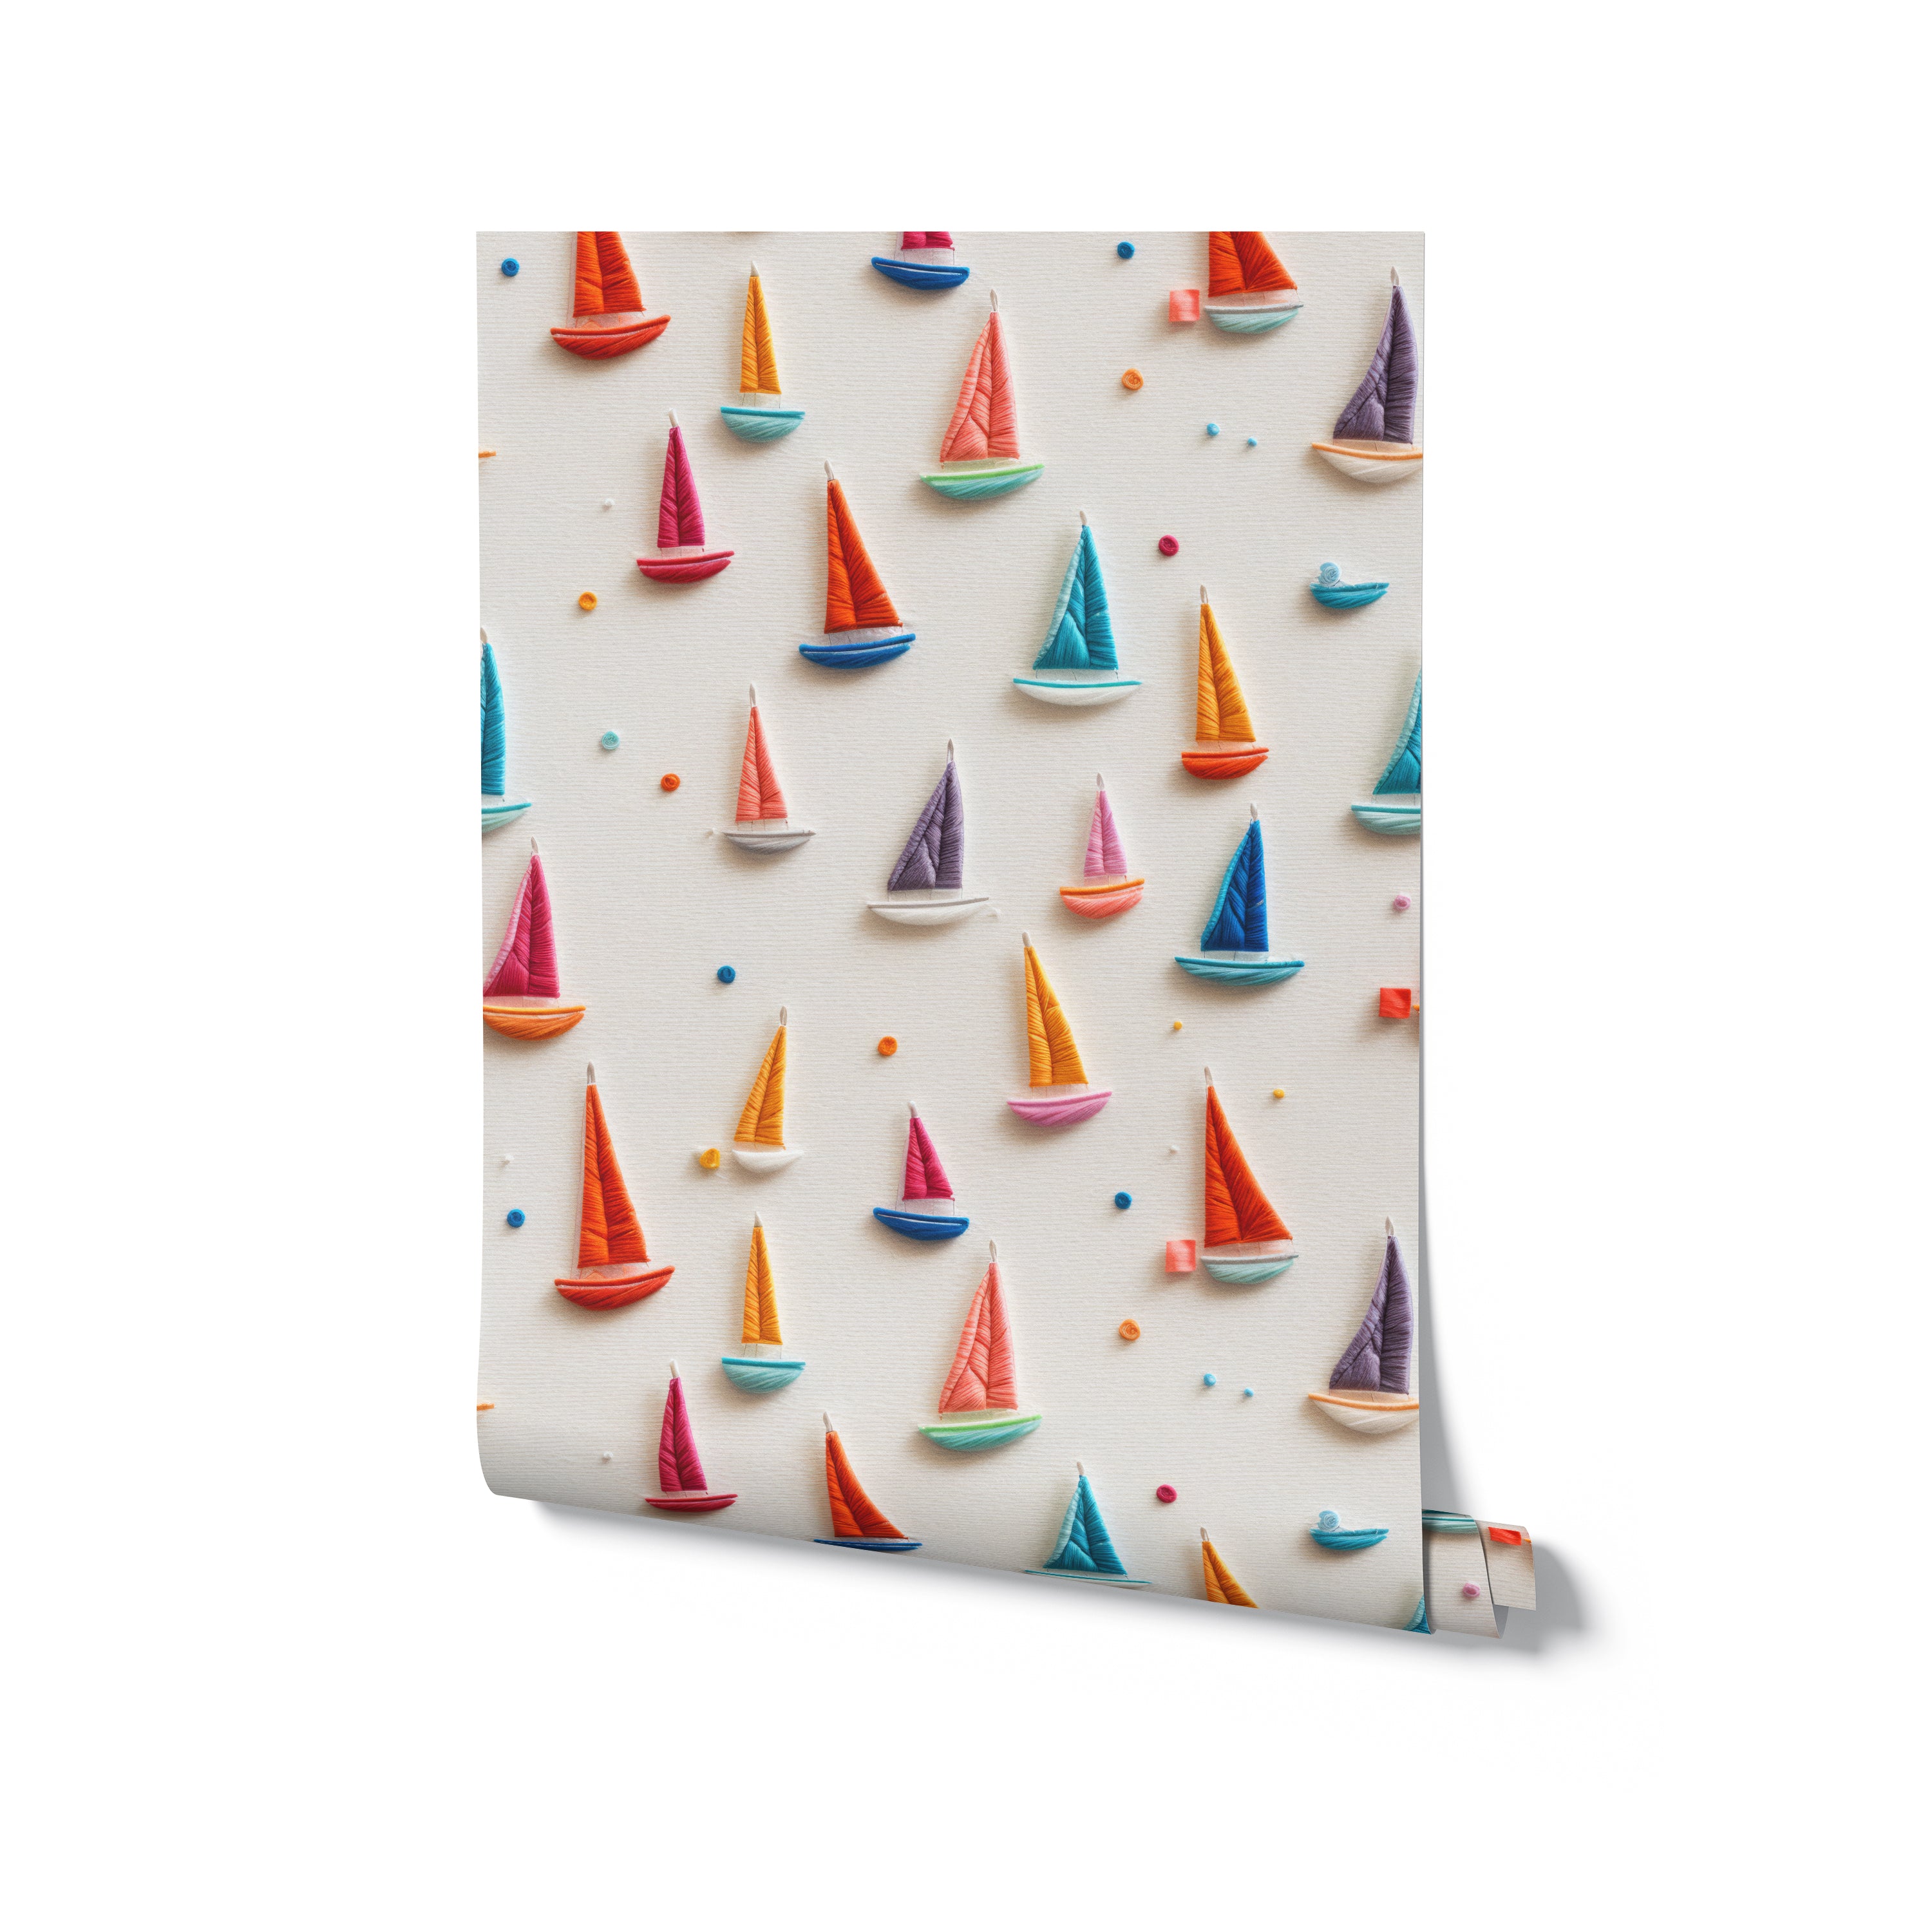 A single roll of 'Tidal Sail Wallpaper' unrolled partially to show the playful design of colorful origami sailboats on a cream background, illustrating a fun choice for a child's room decor.